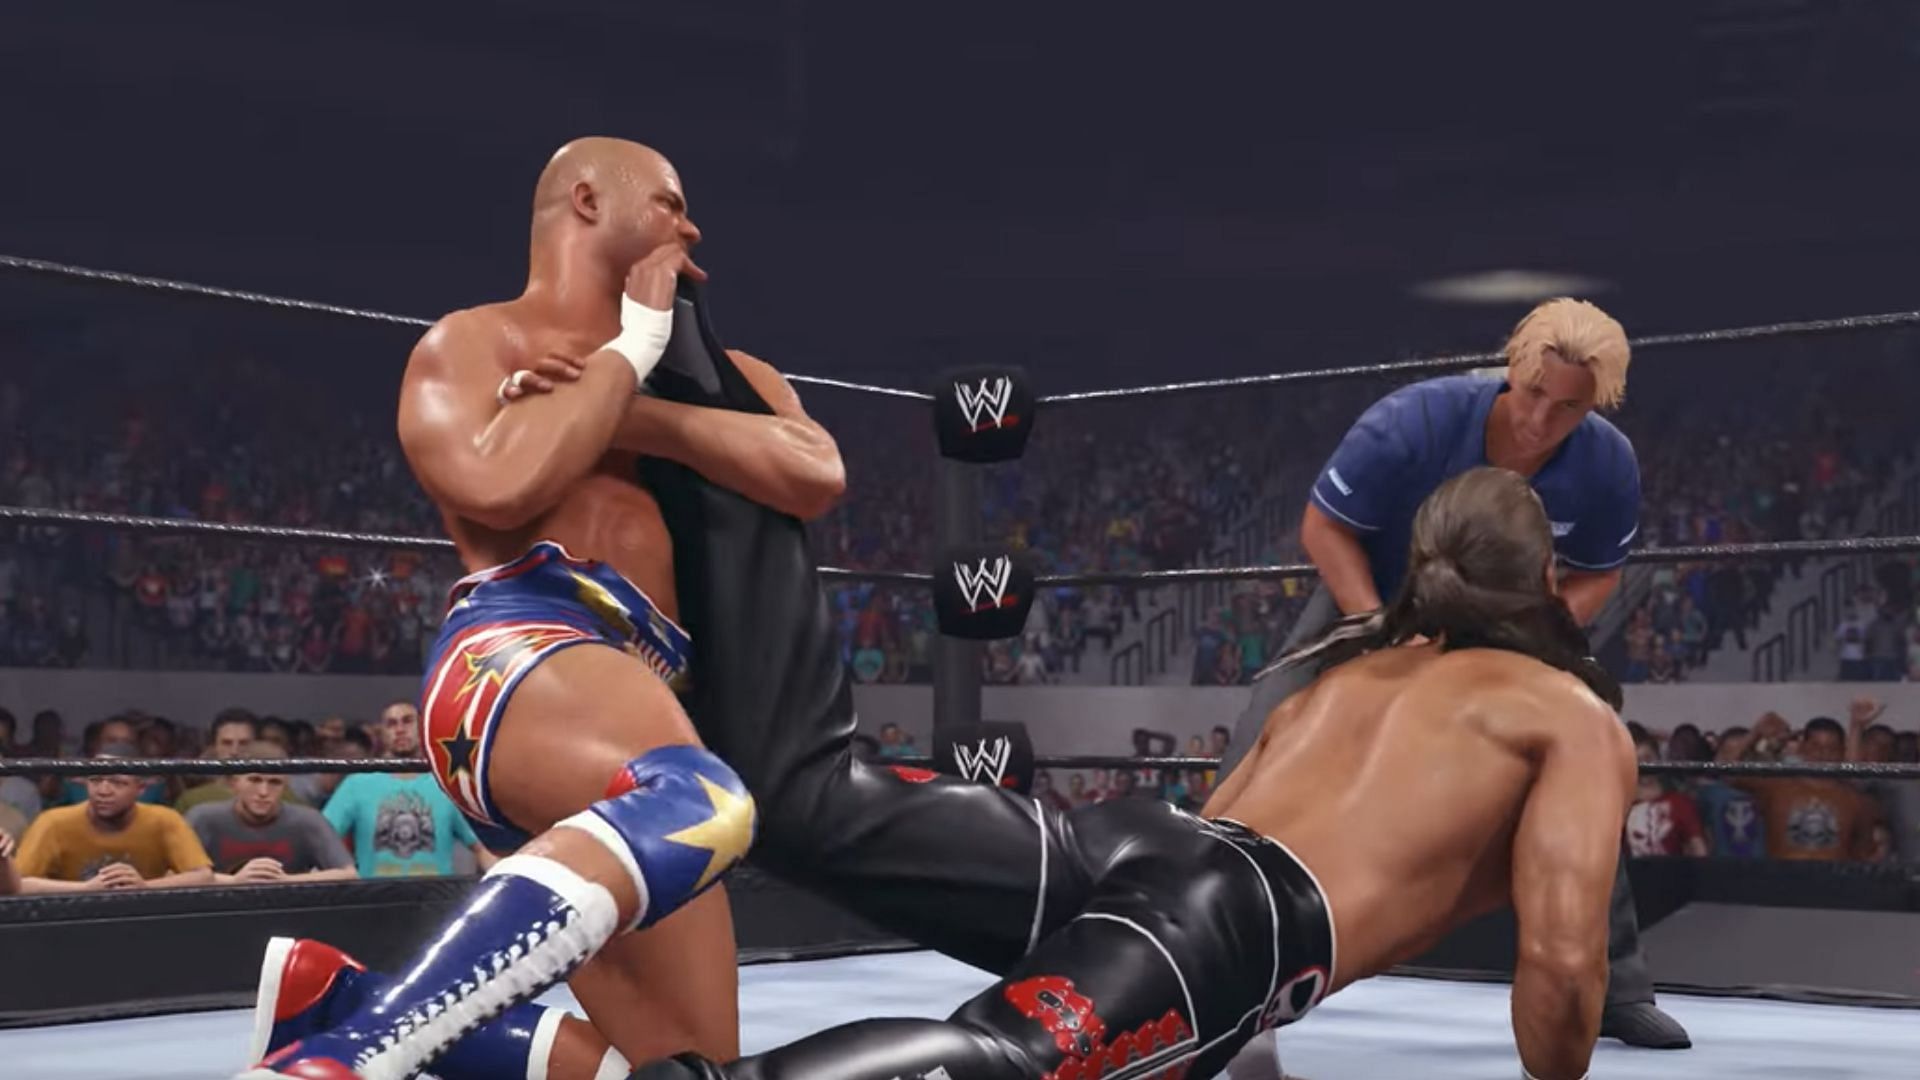 Kurt Angle performing the Angle Lock on Shawn Michaels in WWE 2K24